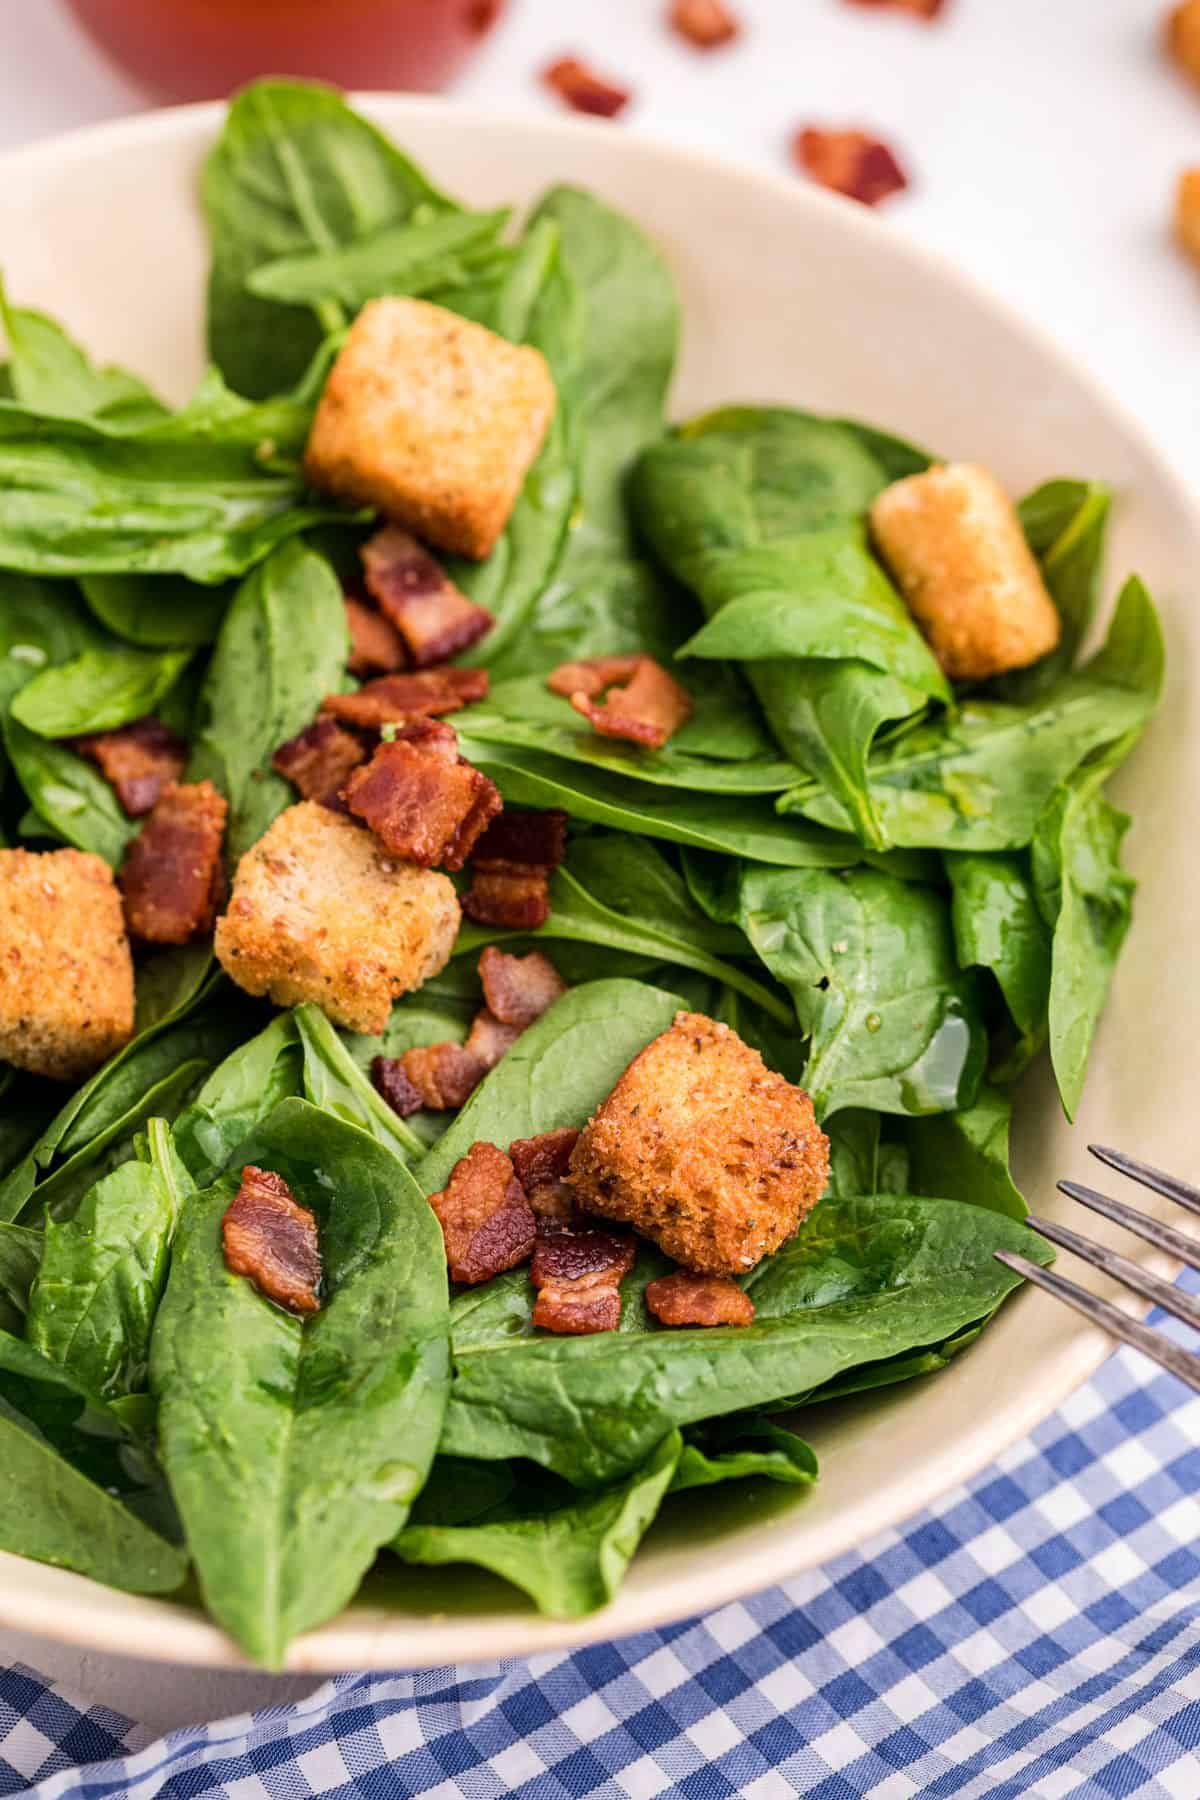 Spinach salad in a white bowl with croutons and bacon.